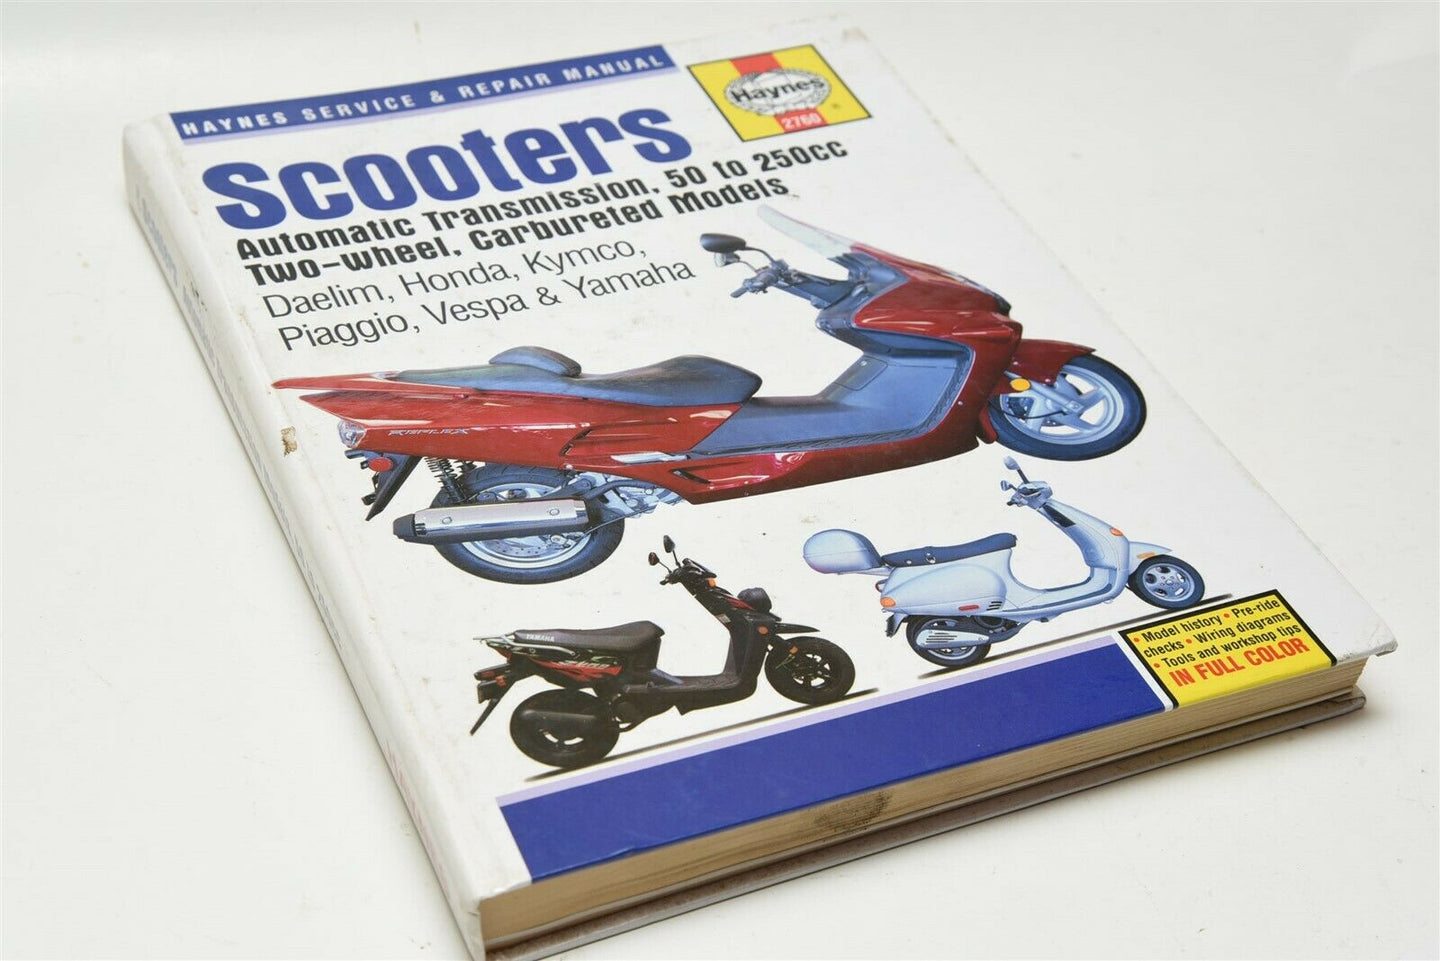 Haynes Service & Repair Manual: Scooters Automatic Transmission 50 to 250cc Carb